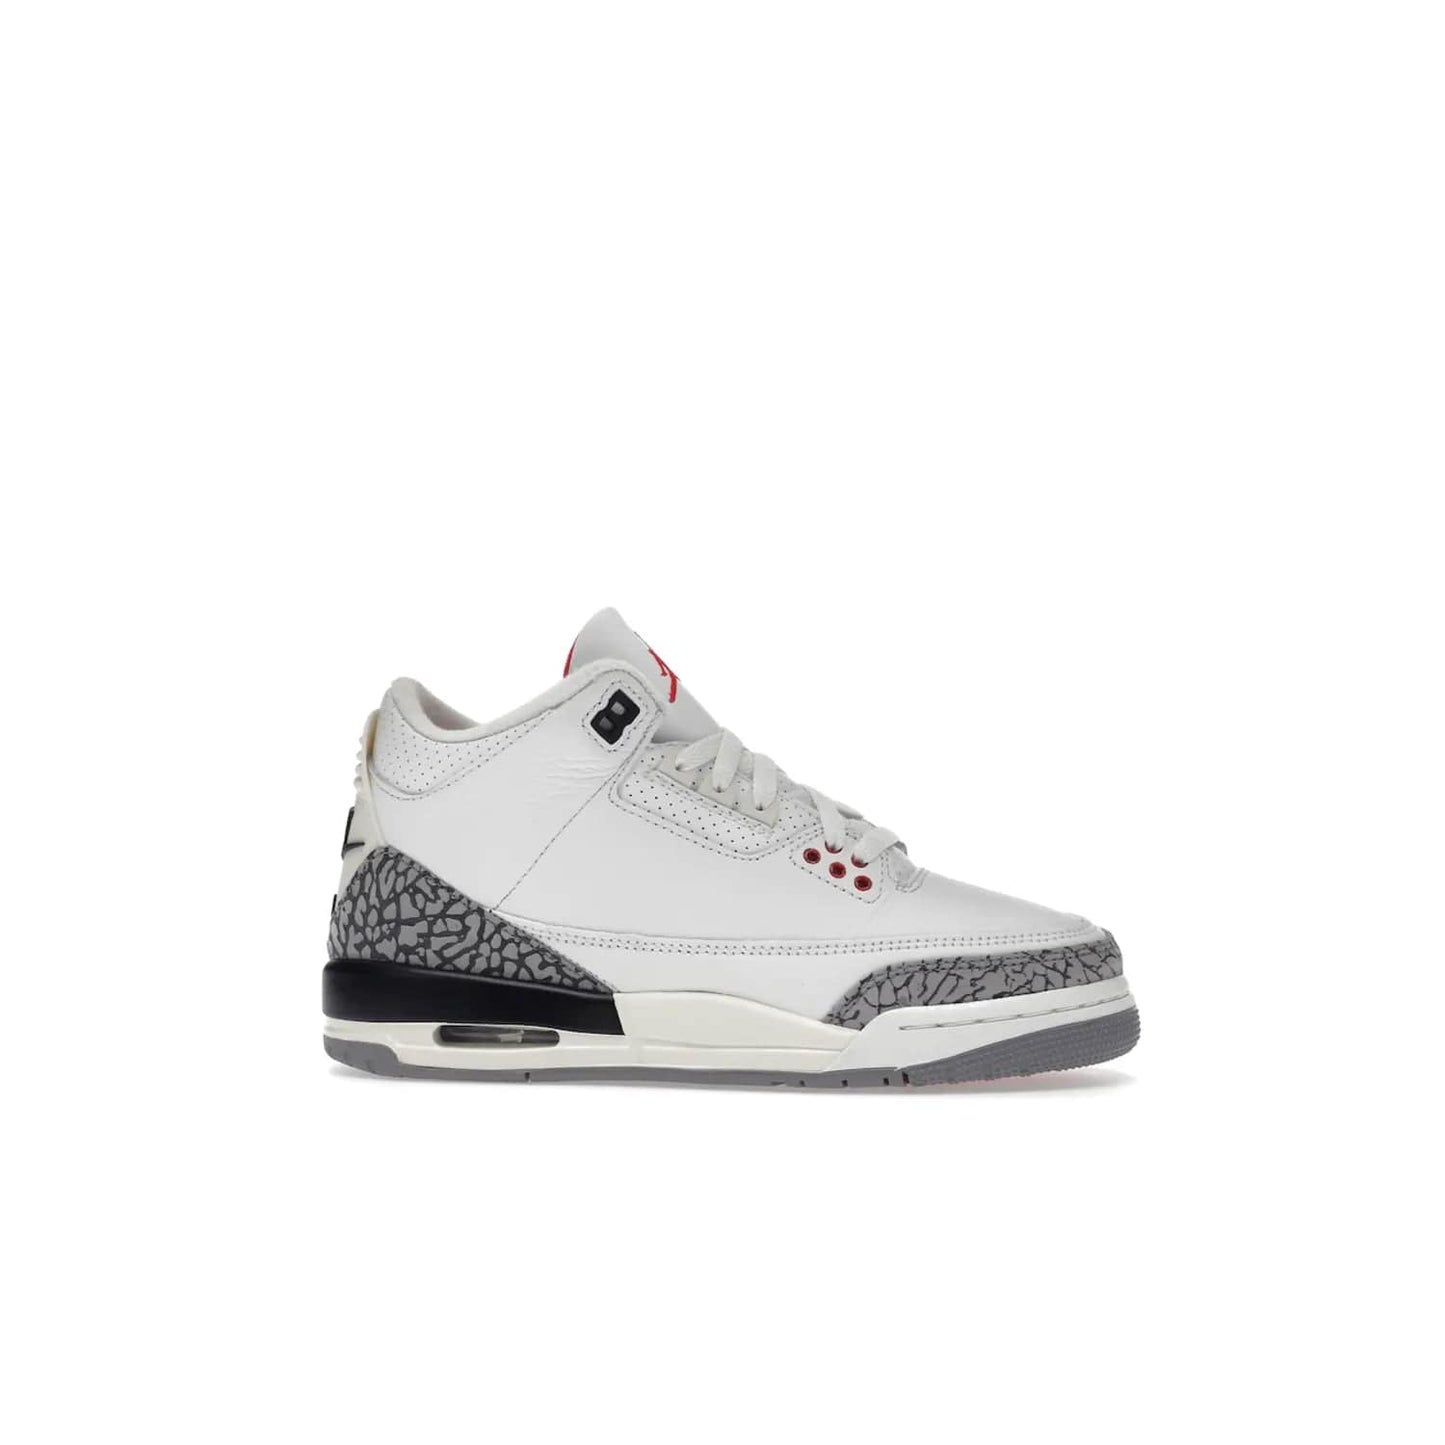 Jordan 3 Retro White Cement Reimagined (GS) - Image 2 - Only at www.BallersClubKickz.com - Grab the perfect blend of modern design and classic style with the Jordan 3 Retro White Cement Reimagined (GS). Features Summit White, Fire Red, Black, and Cement Grey colorway, iconic Jordan logo embroidered on the tongue, and “Nike Air” branding. Limited availability, get your pair before March 11th 2023.